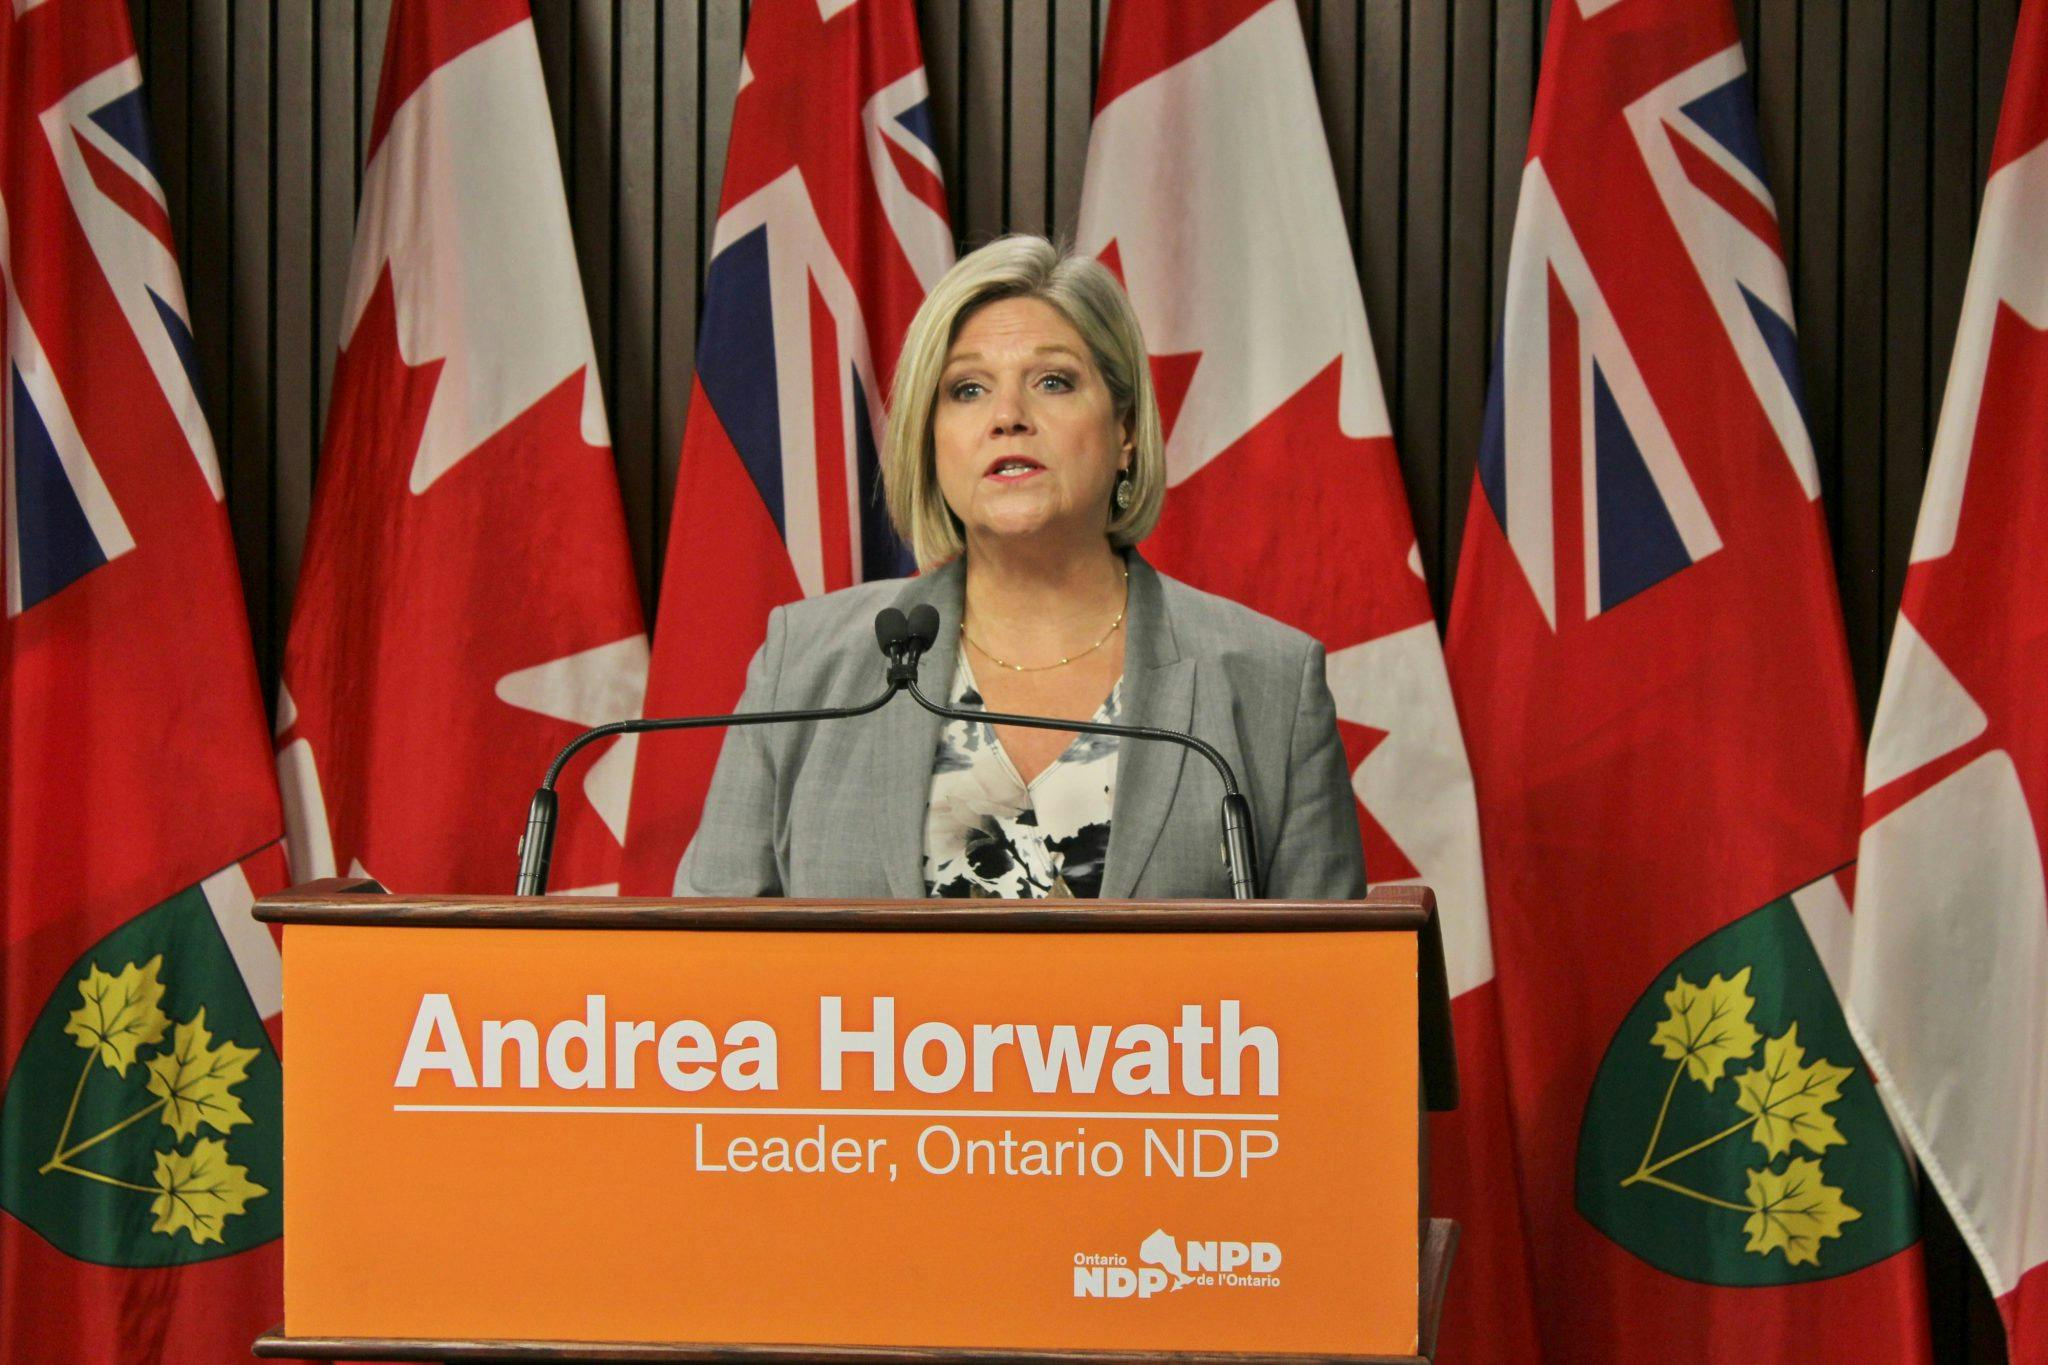 Andrea Horwath says she would end standardized testing